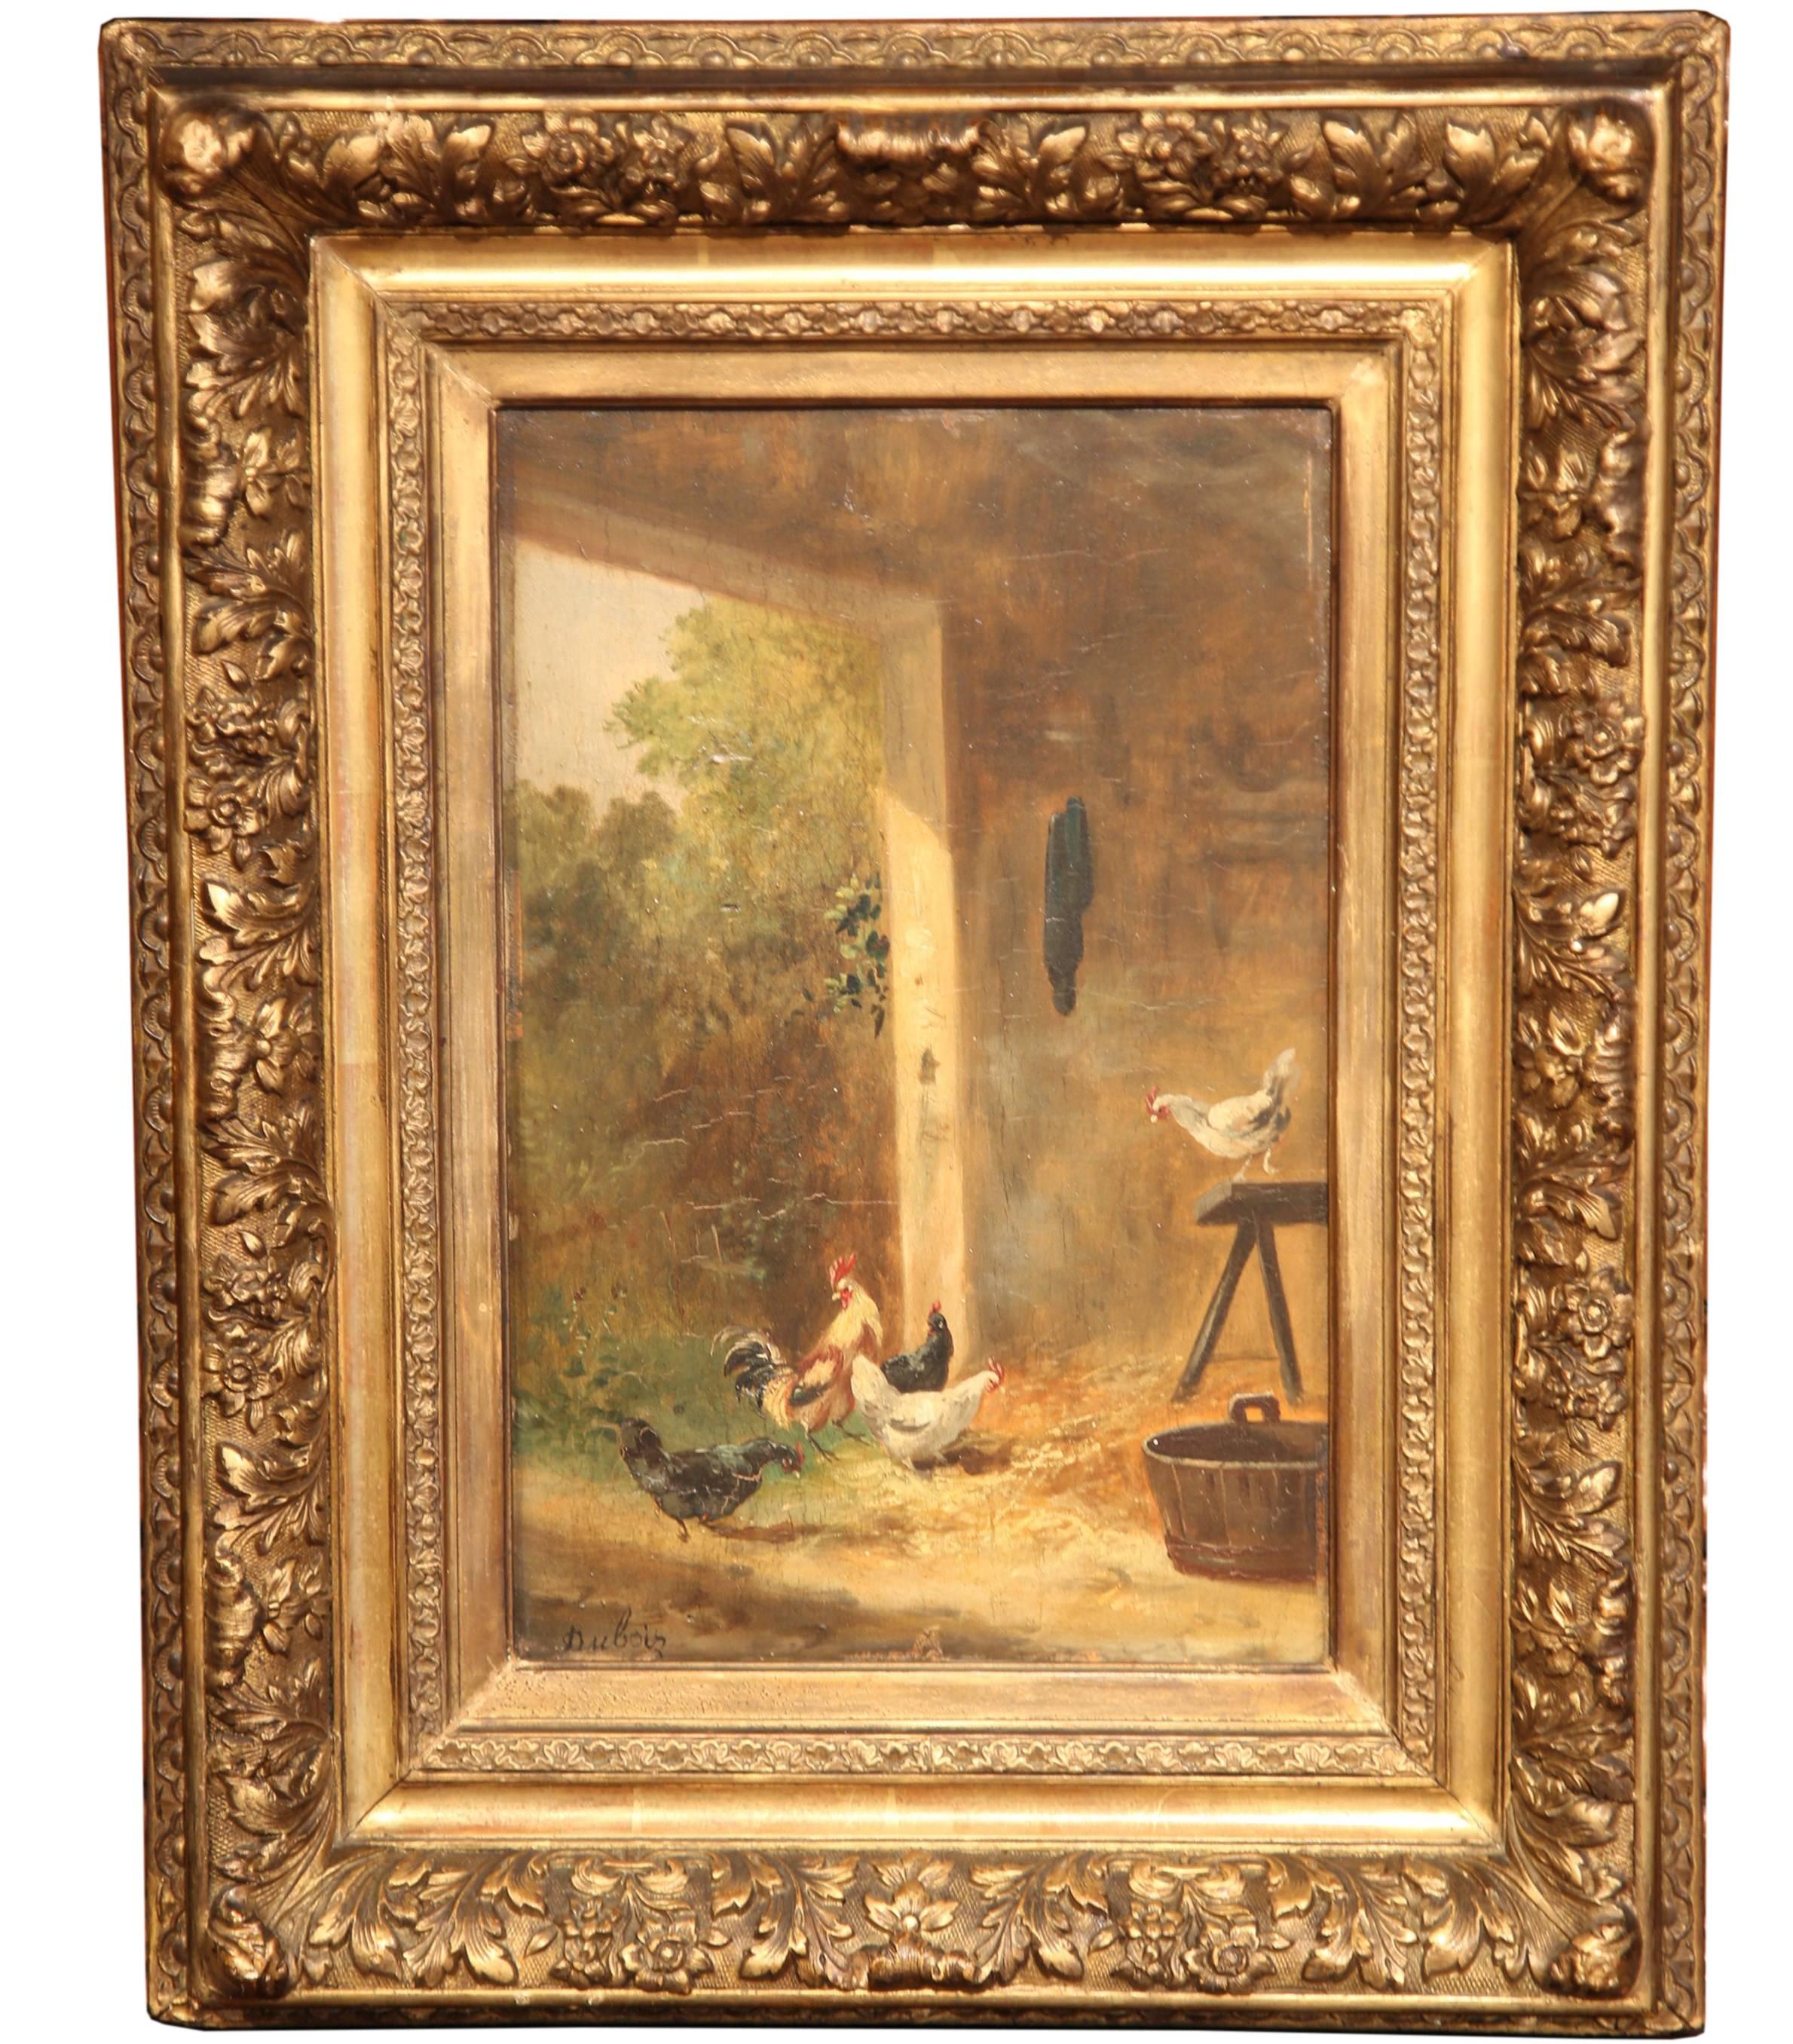 Unknown Animal Painting - 19th Century French Chicken Painting on Board in Gilt Frame Signed Dubois